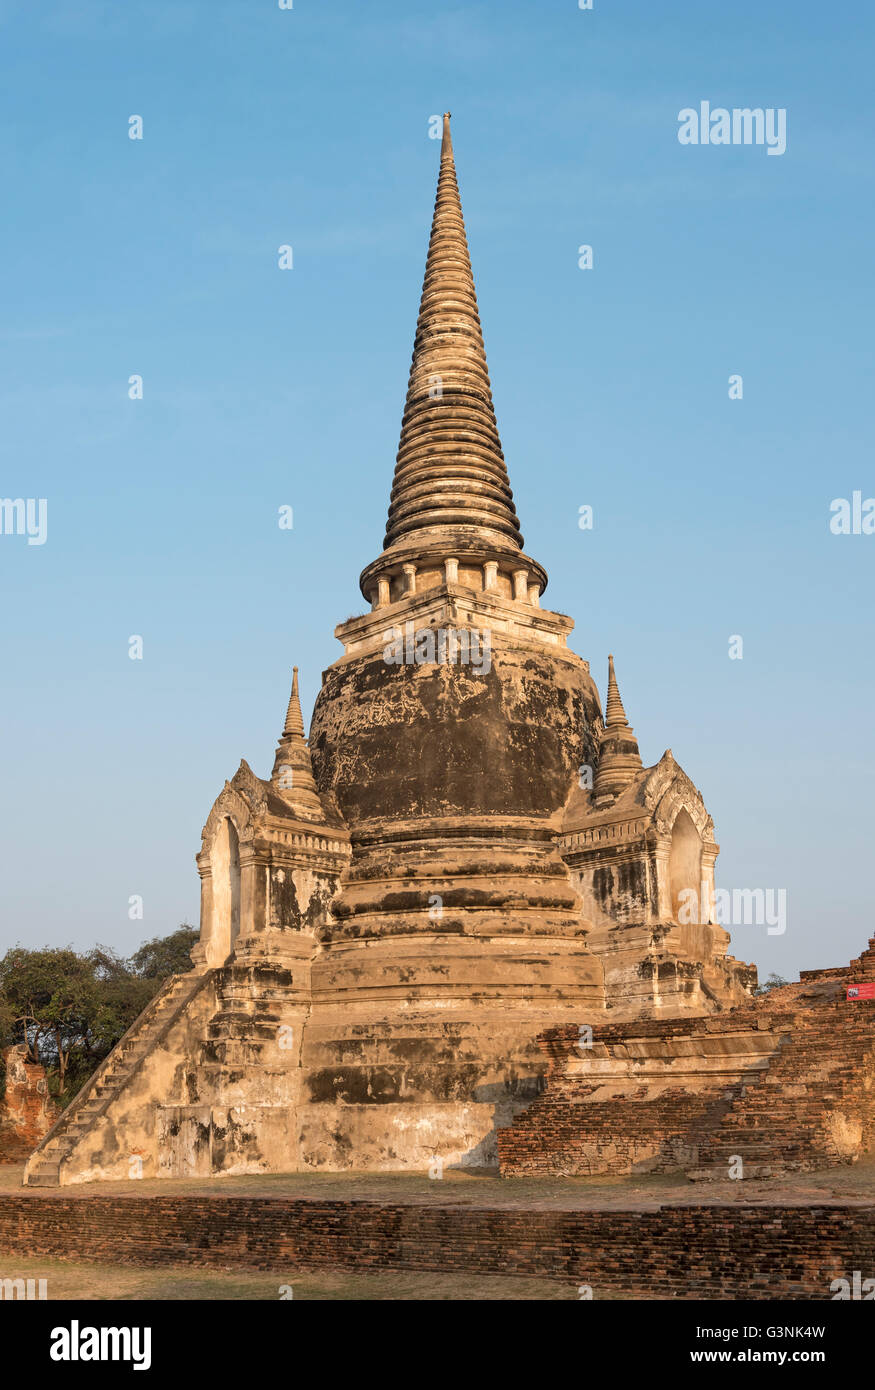 Chedi at Wat Phra Si Sanphet, Buddhistic temple complex, Ayutthaya, Thailand Stock Photo